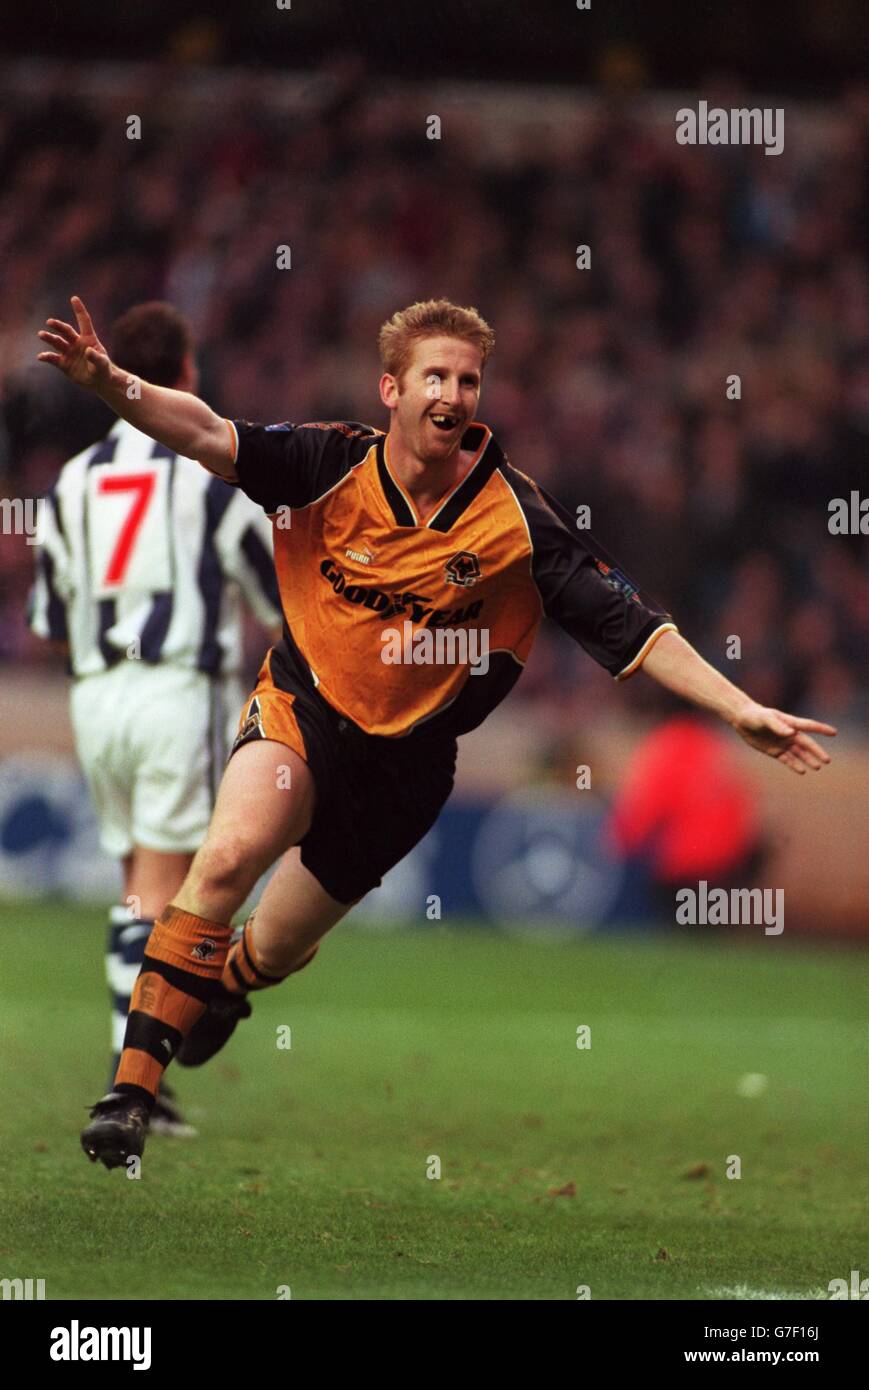 Soccer - Endsleigh League Division One - Wolverhampton Wanderers v West Bromwich Albion. Iwan Roberts celebrates scoring Wolverhampton Wanderers' second goal Stock Photo